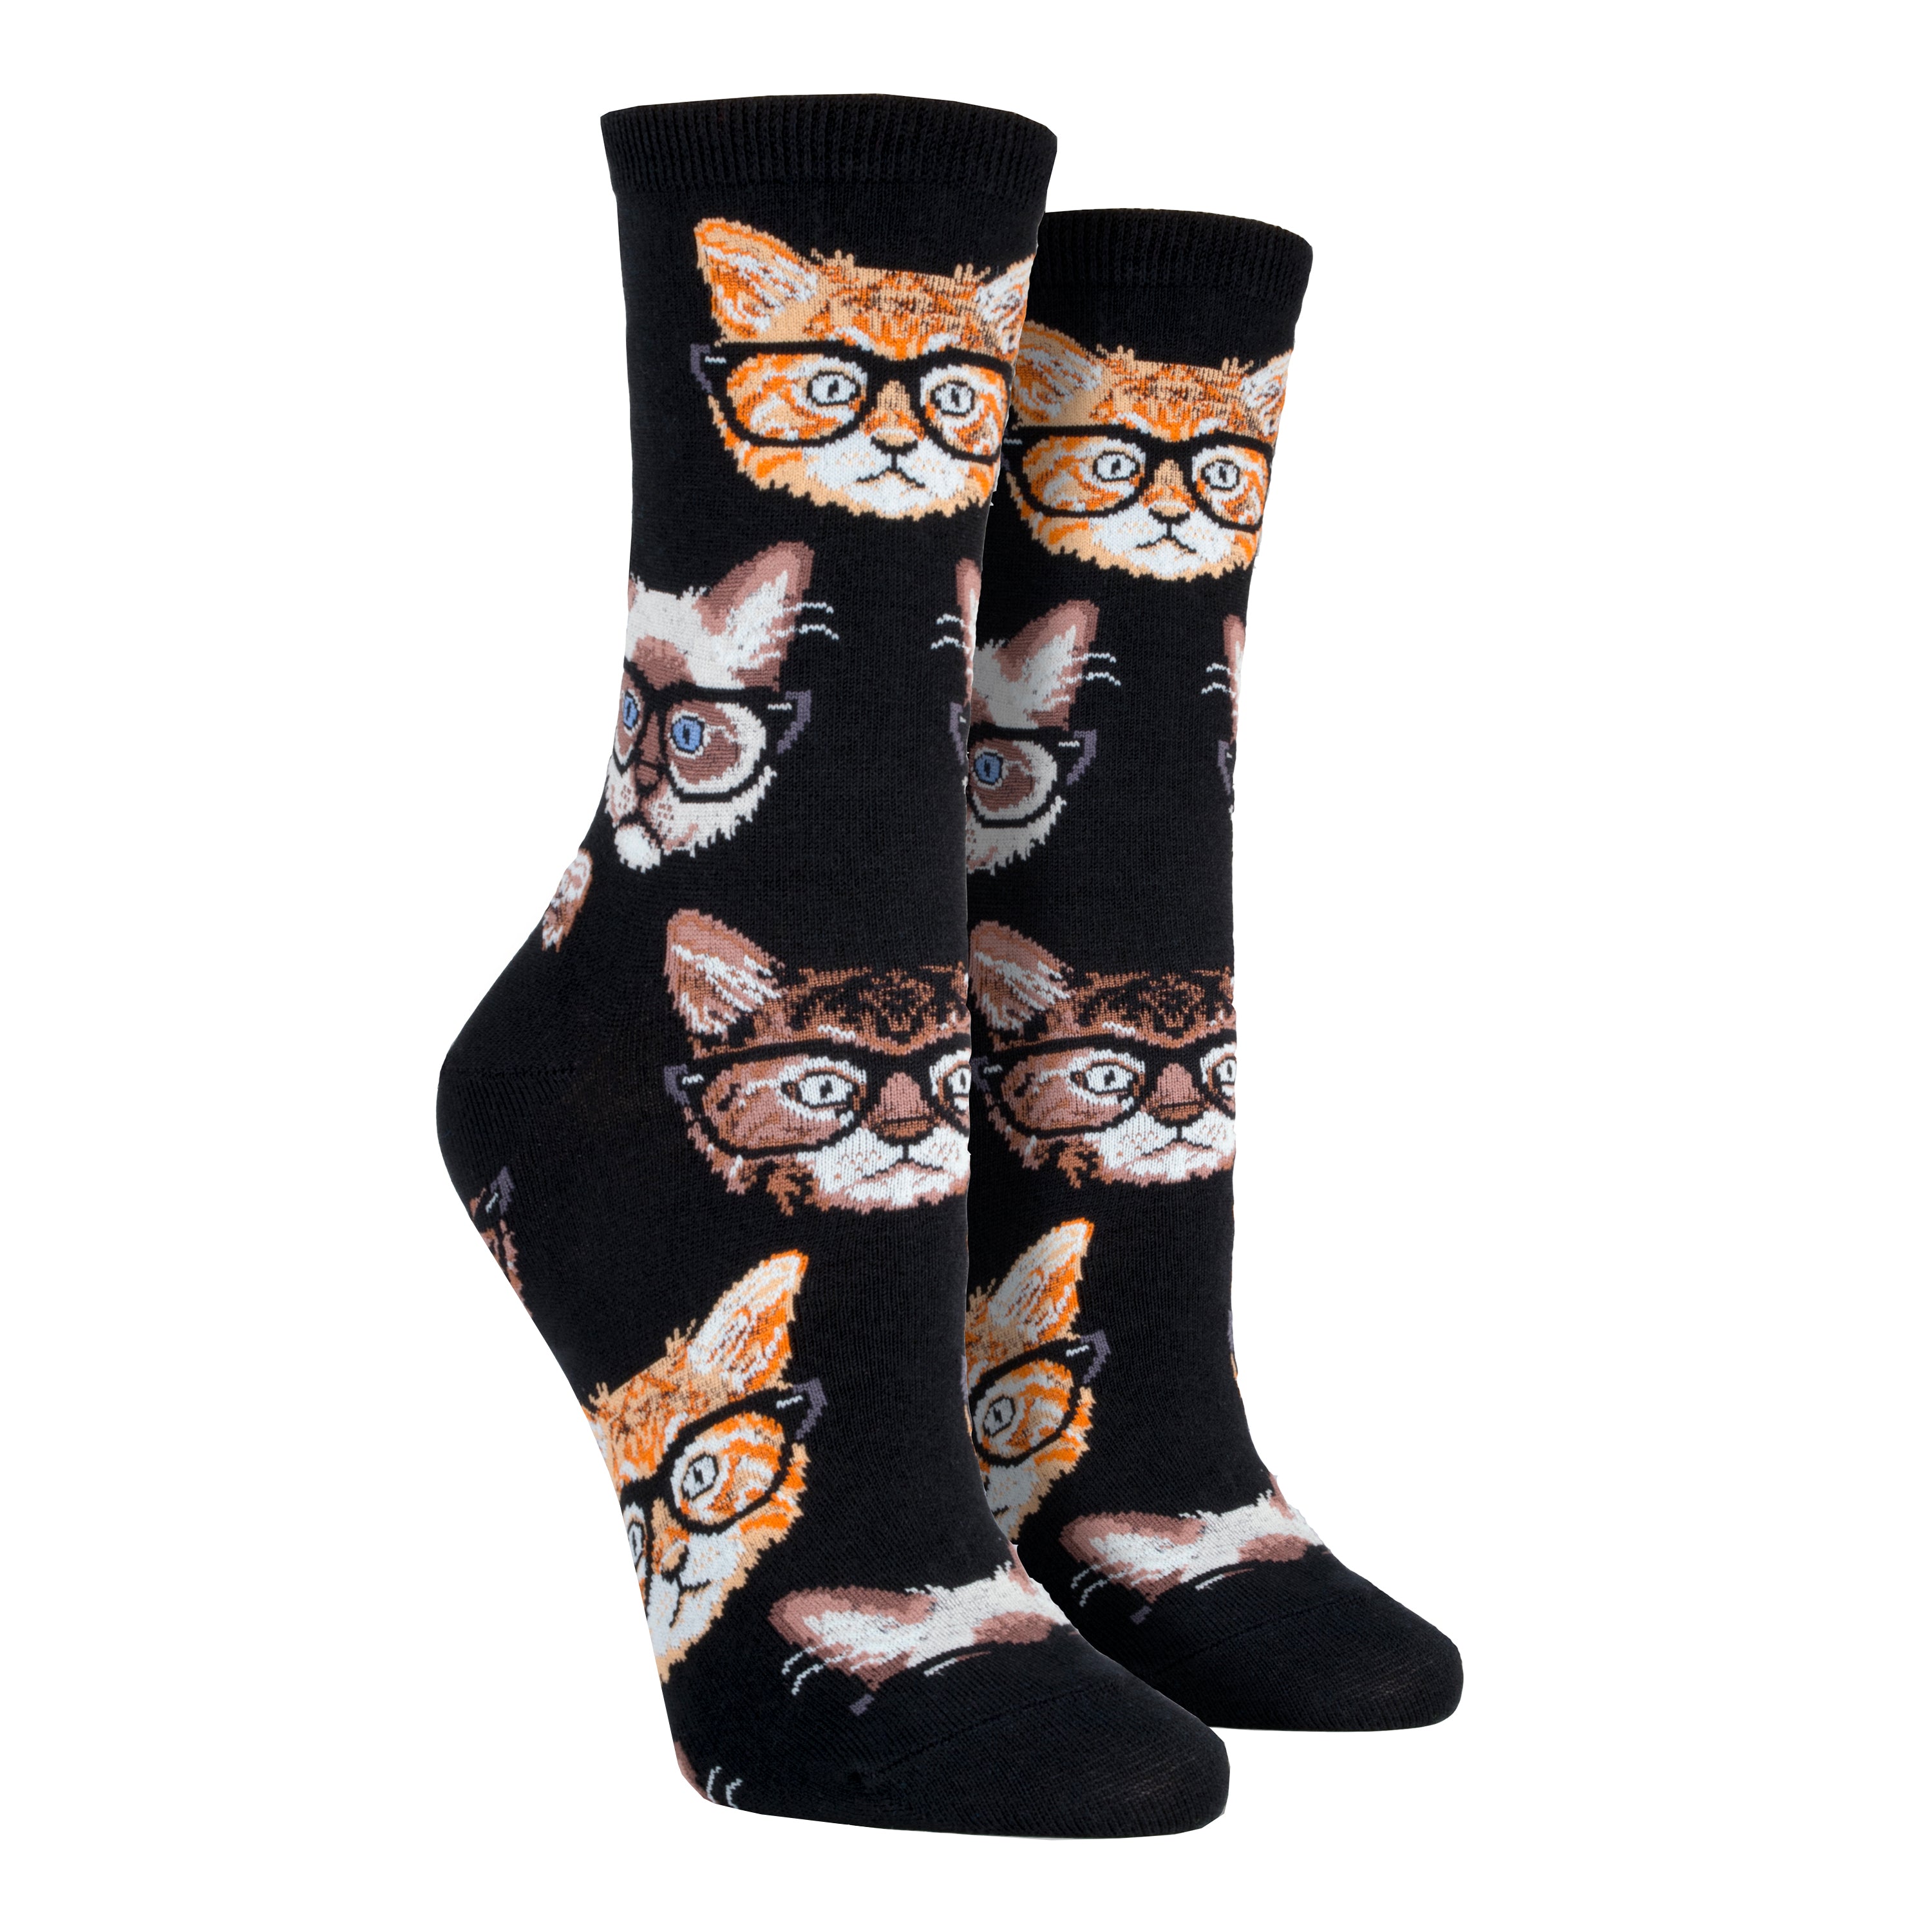 Shown on leg forms, a pair of black socks with different types of cat faces wearing black rimmed 